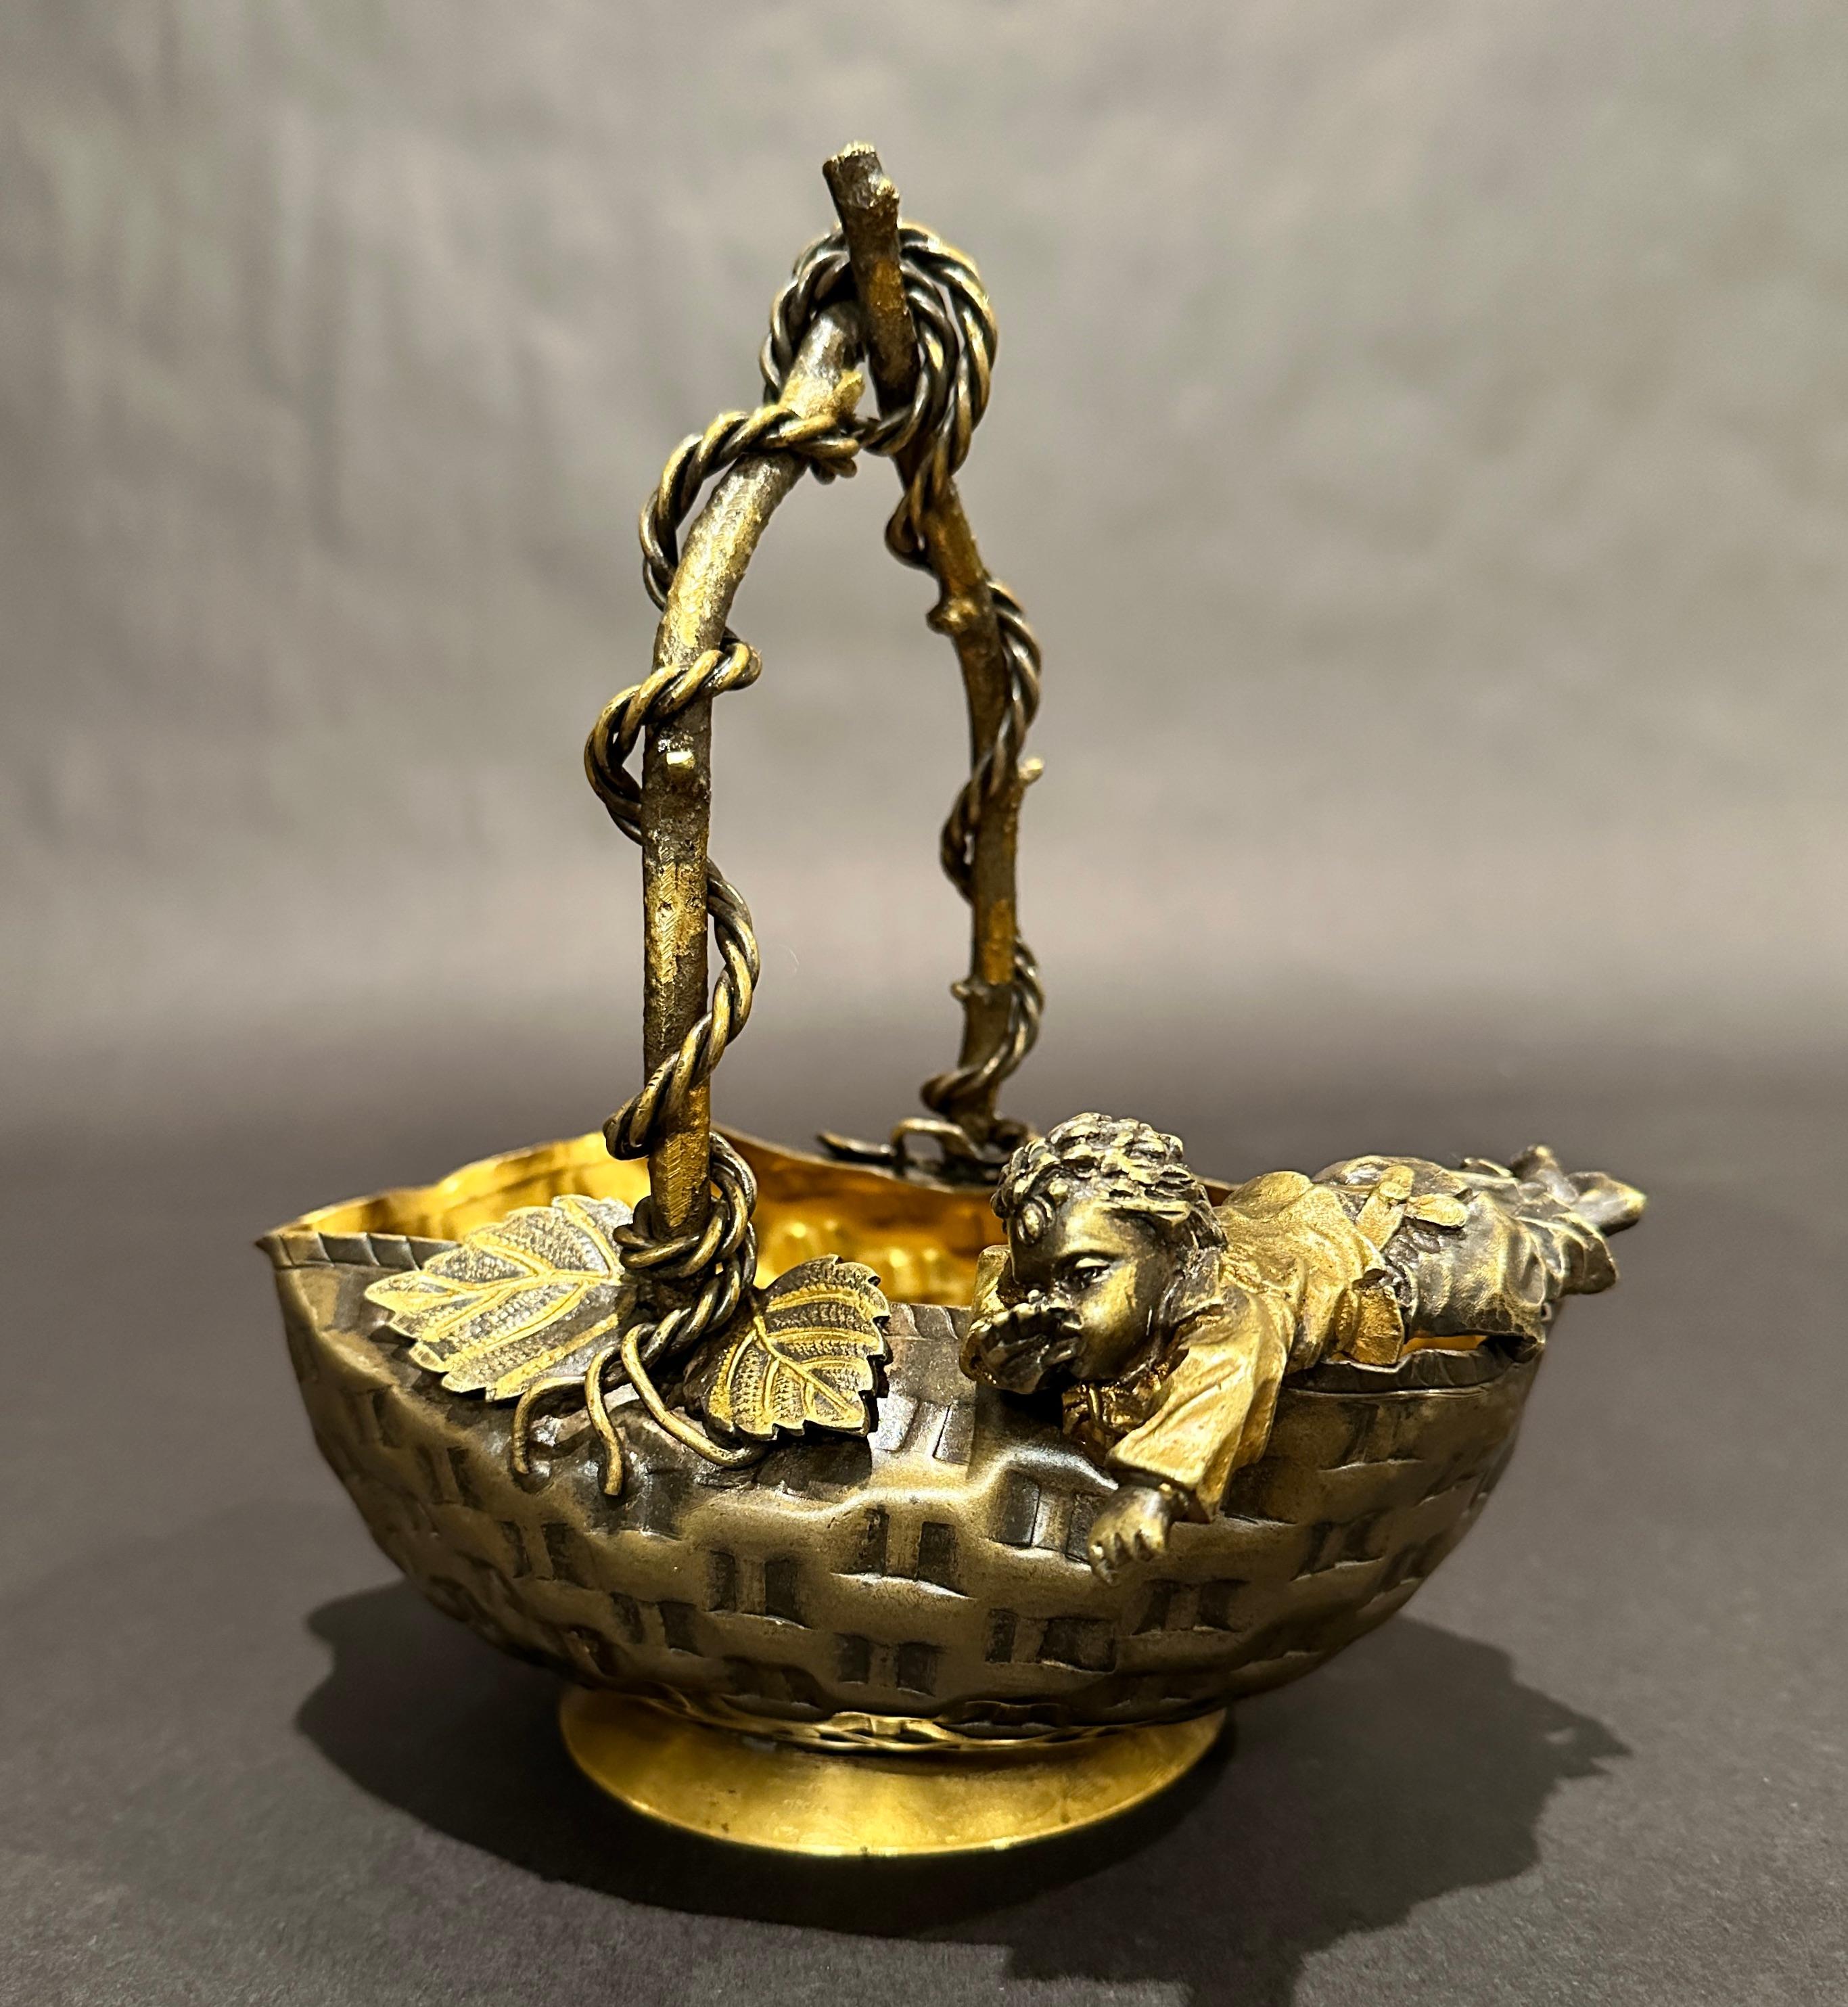 French aesthetic movement patinated and gilt bronze figural center bowl/basket, third quarter 19th century, formed as a large stylized woven basket. With leaves and vines as well as handle mounted with leavesand twisted vines. The edge of basket